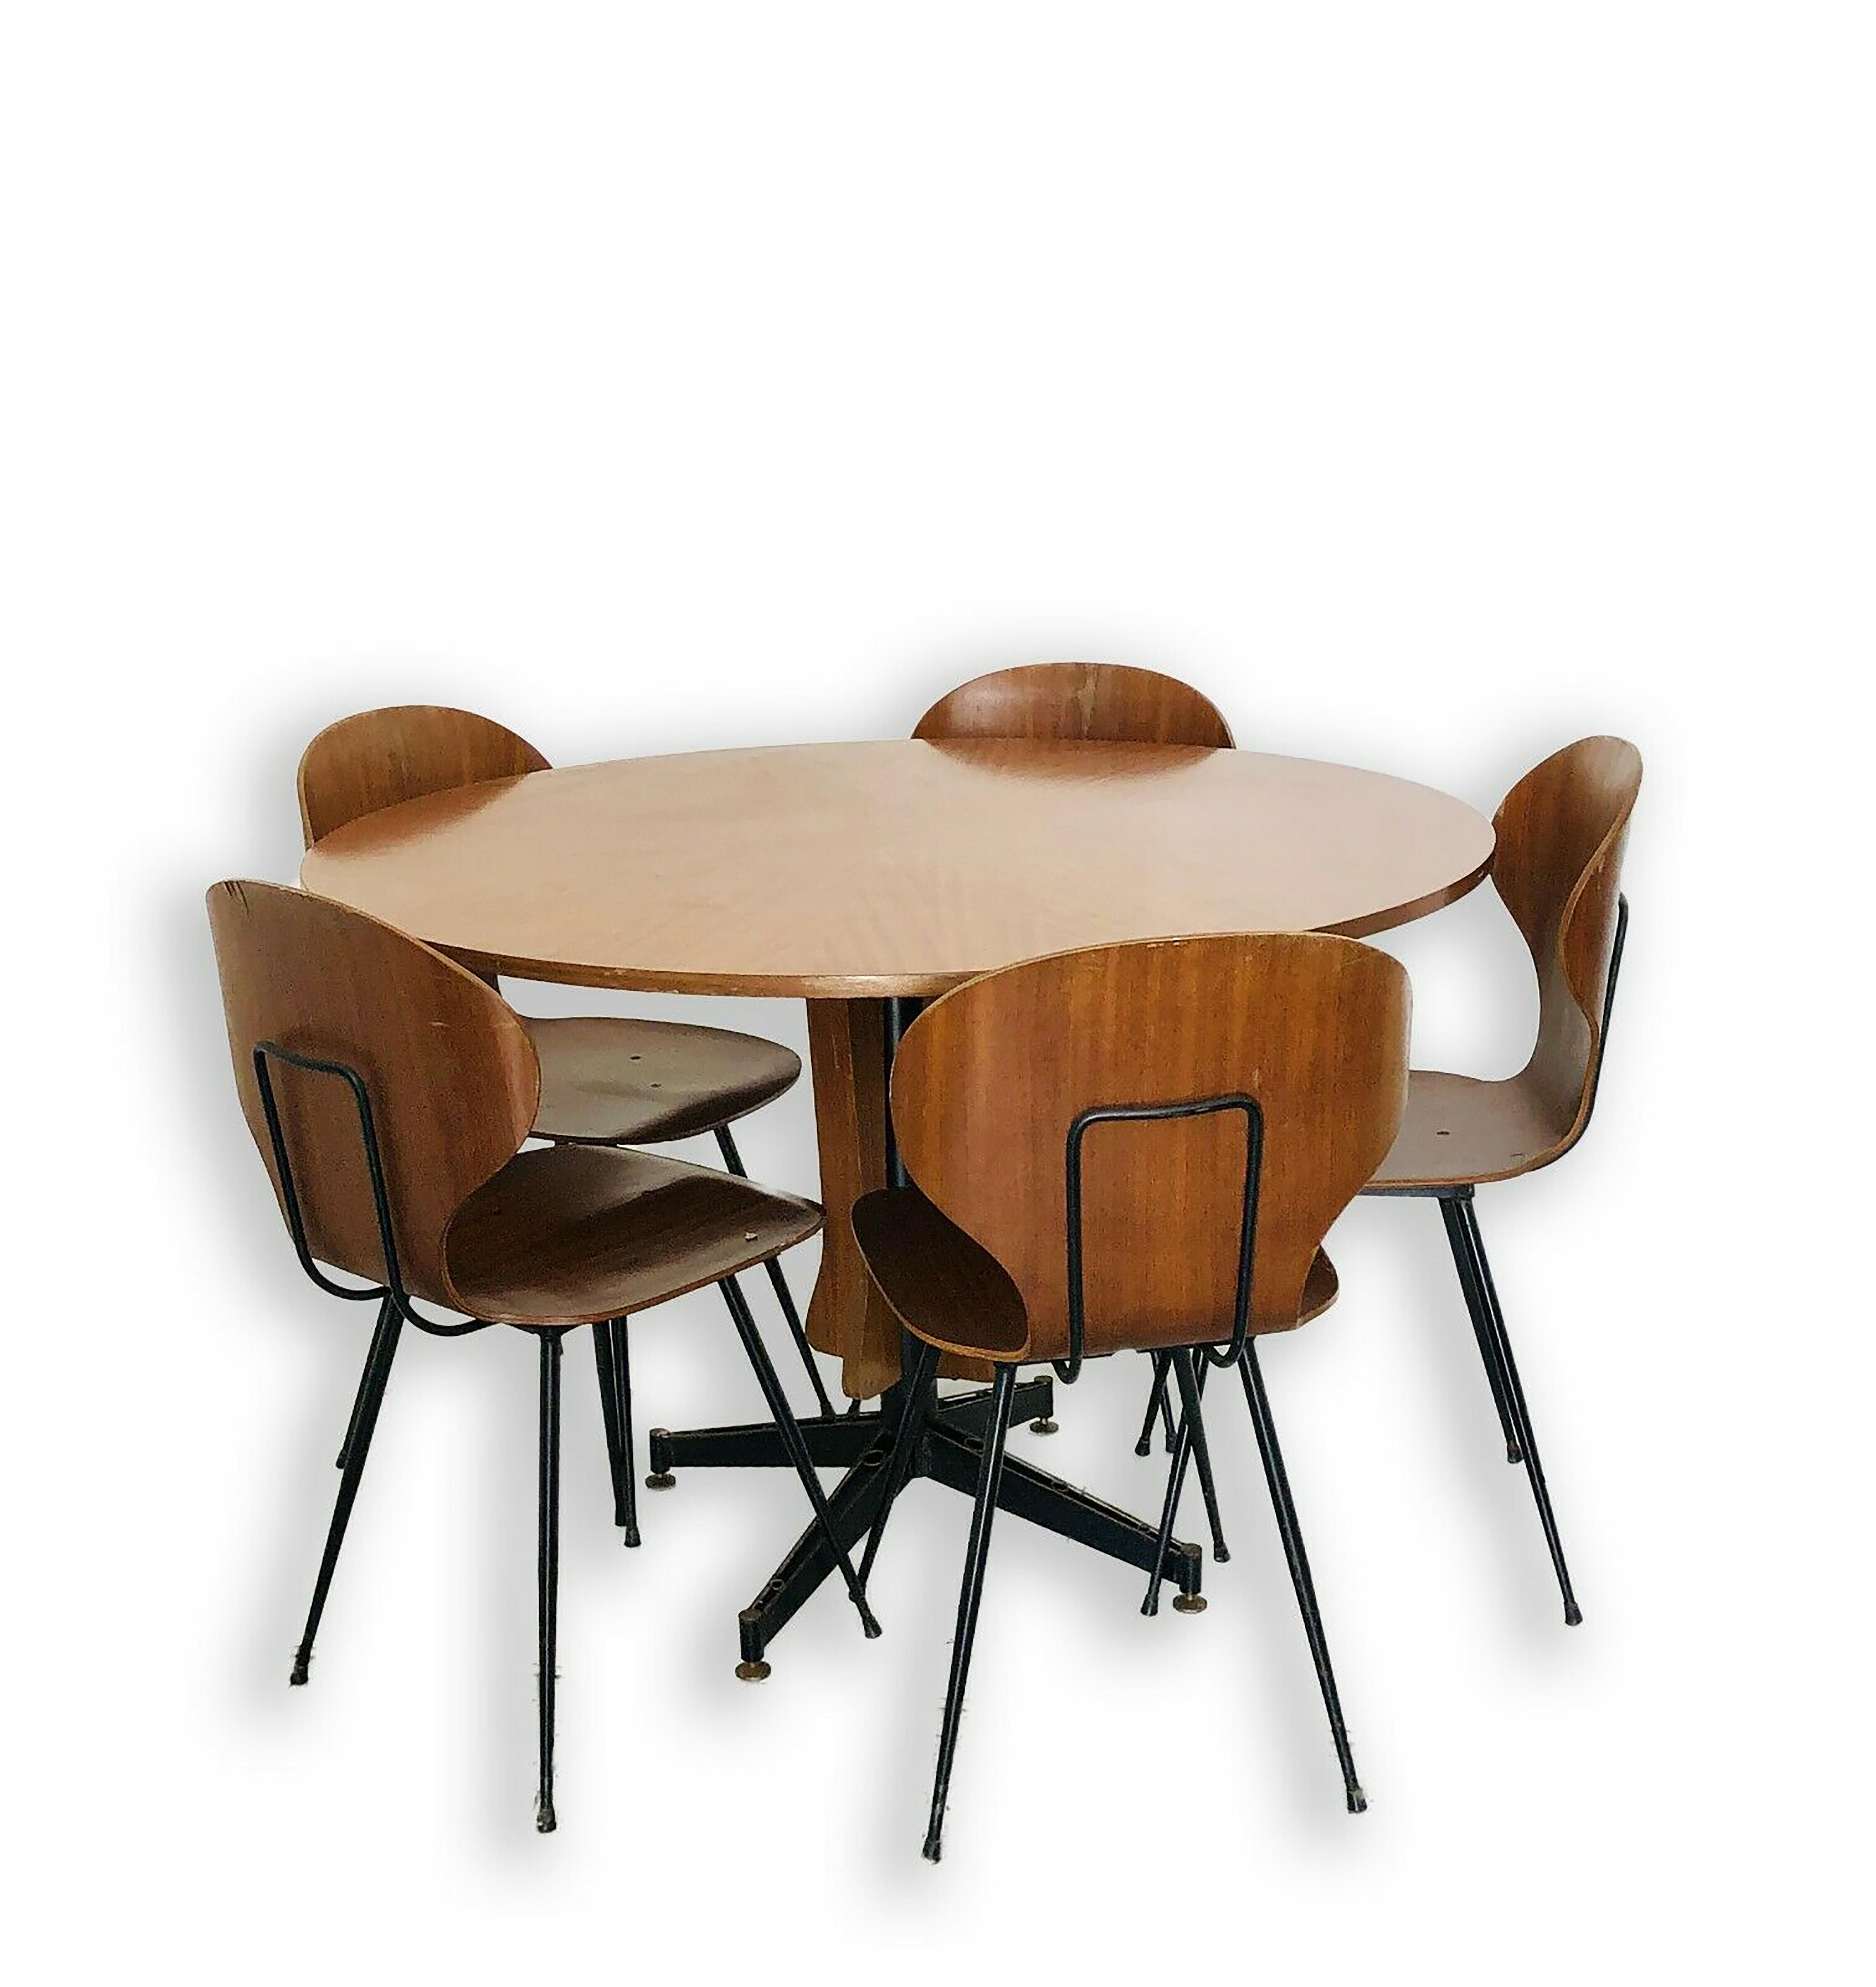 Mid-Century Modern Dining Set of Table and Five Chairs, by Carlo Ratti, Italy, 1950s